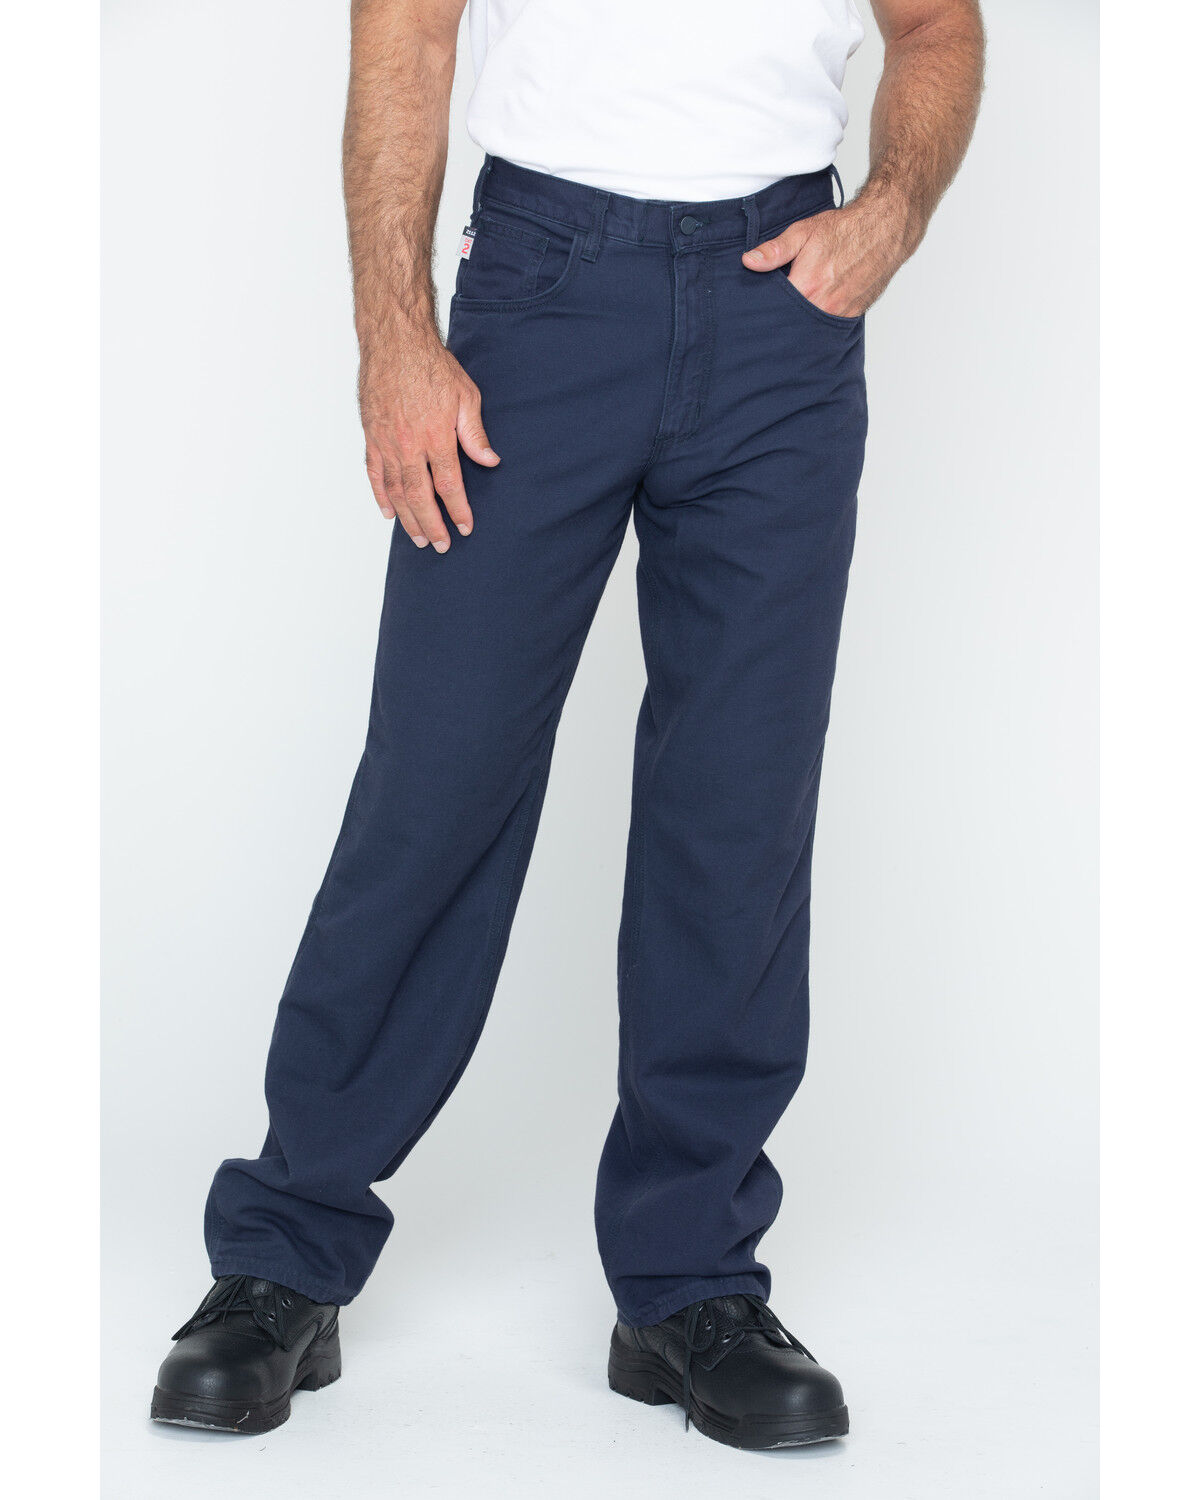 Carhartt FR Canvas Work Duty Pants Jean 36 X 32 Frb159dny Flame Resistant Cat2 for sale online 